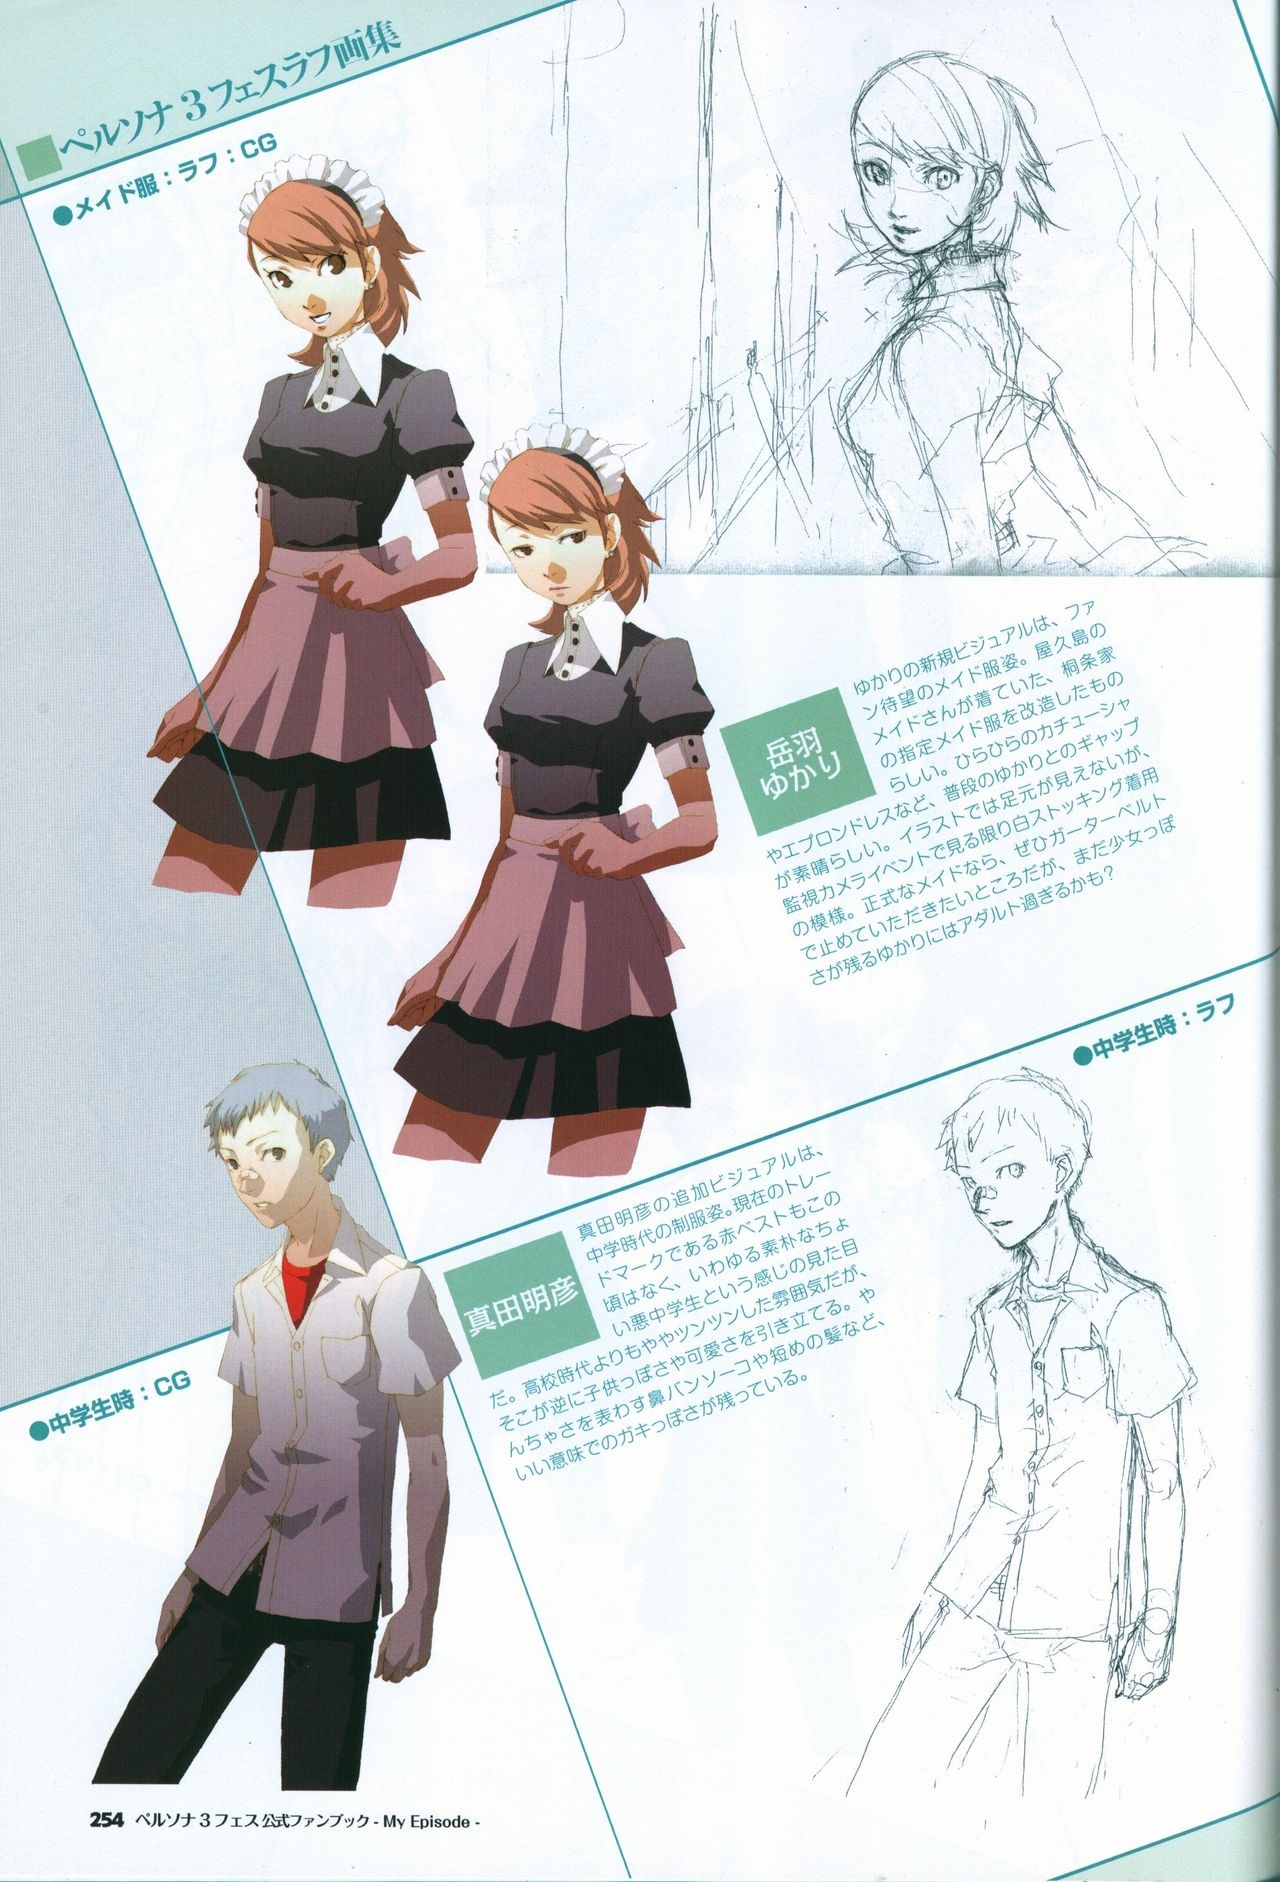 Persona 3 Fes Official Fan Book -My Episode- 255